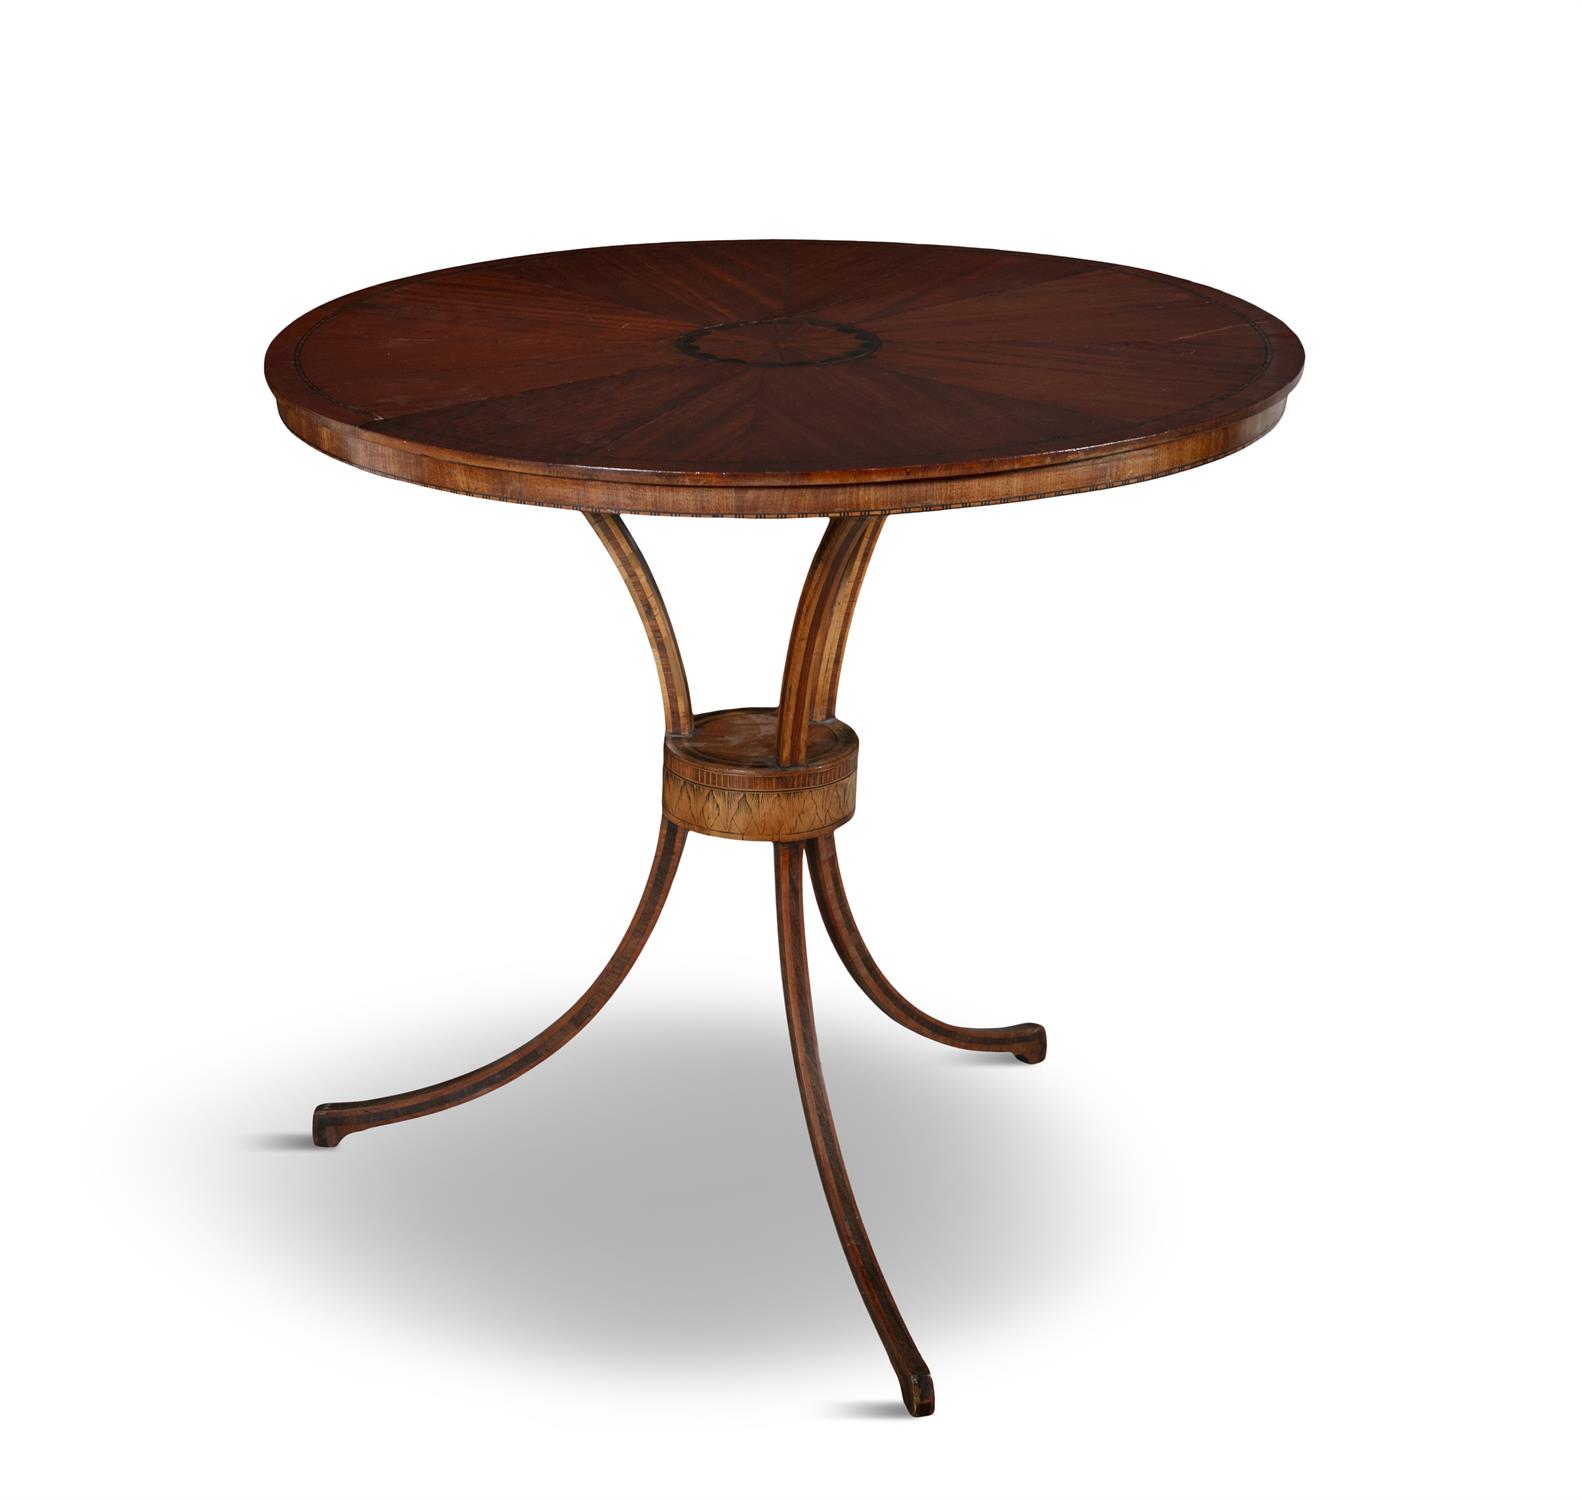 A MAHOGANY AND SATINWOOD INLAID CENTRE TABLE, LATE 18TH CENTURY, the top with central paterae - Image 2 of 4